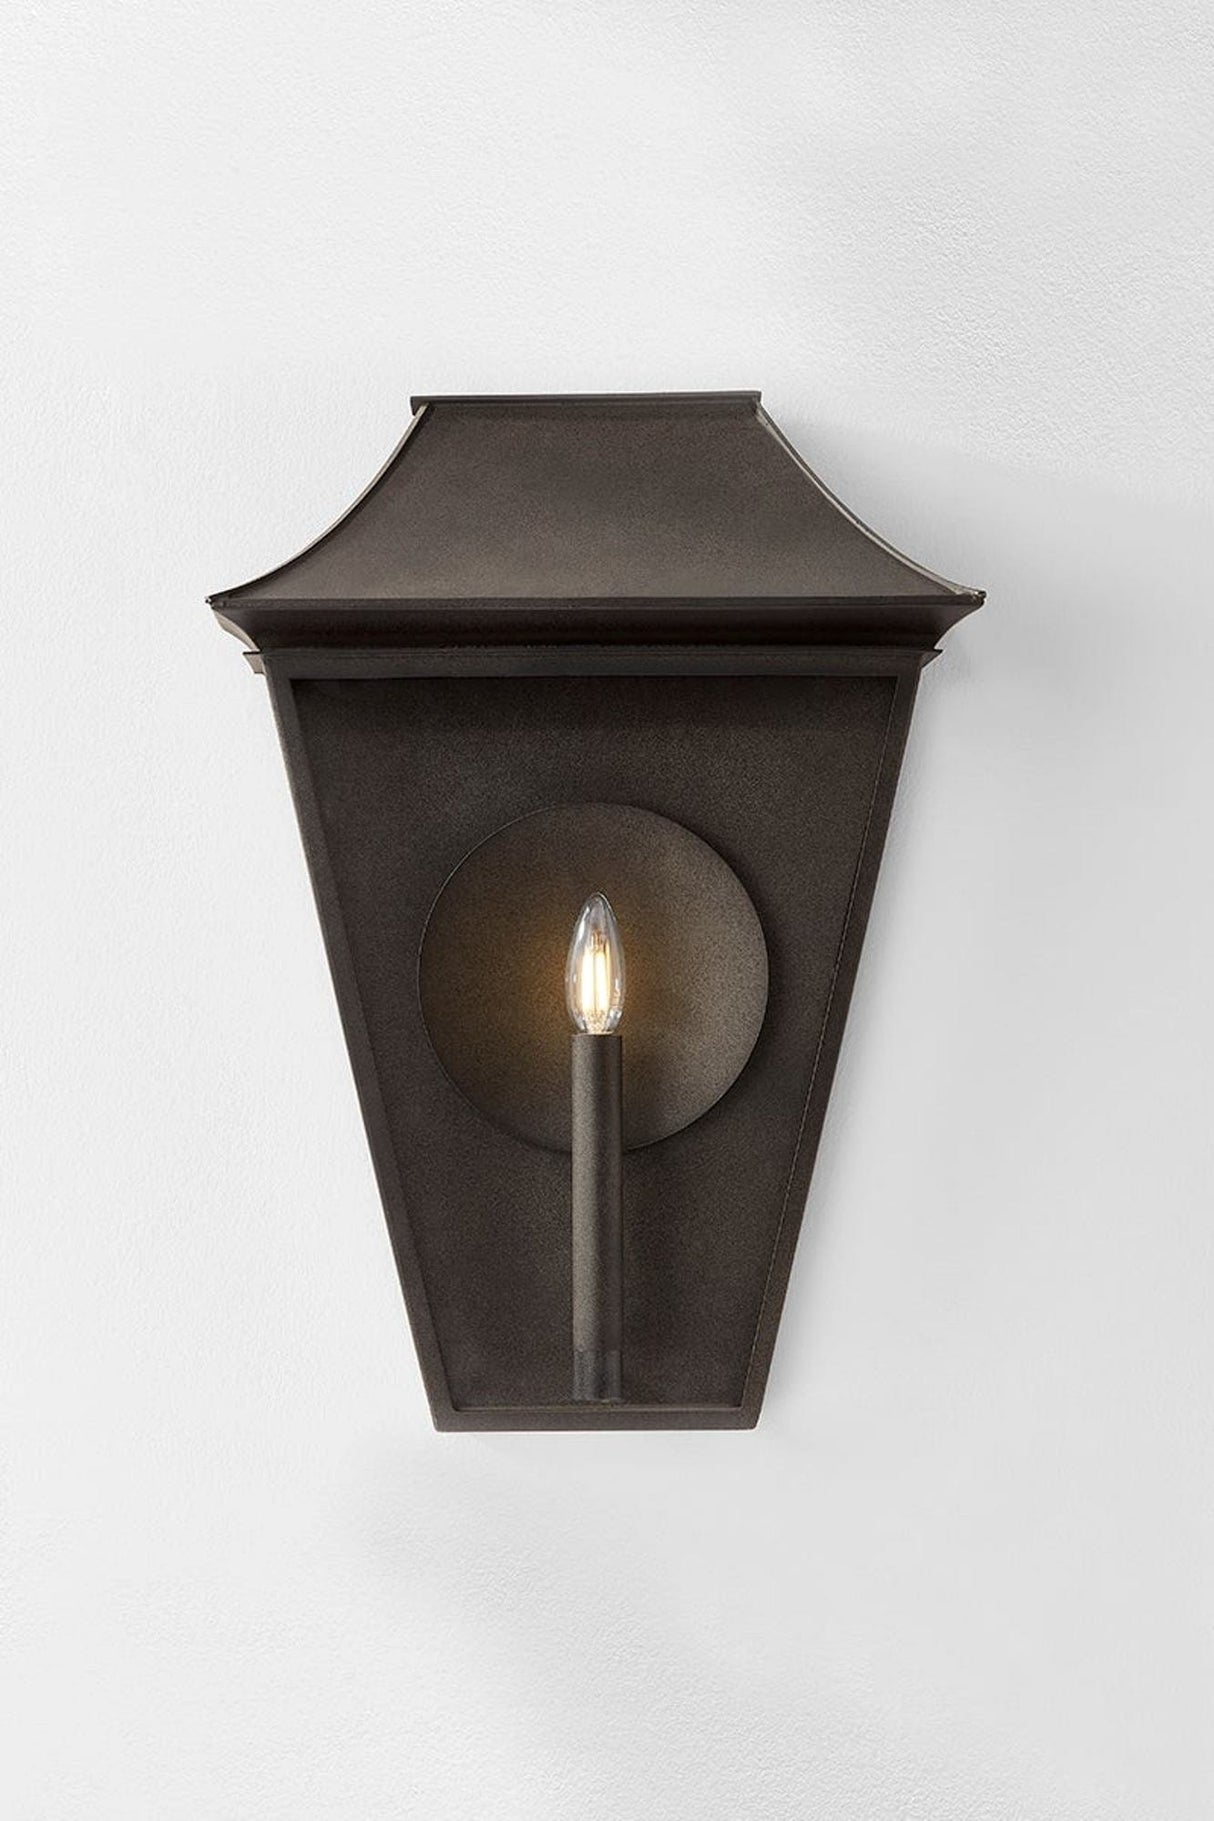 Troy Lighting Tehama Exterior Wall Sconce Wall Sconces